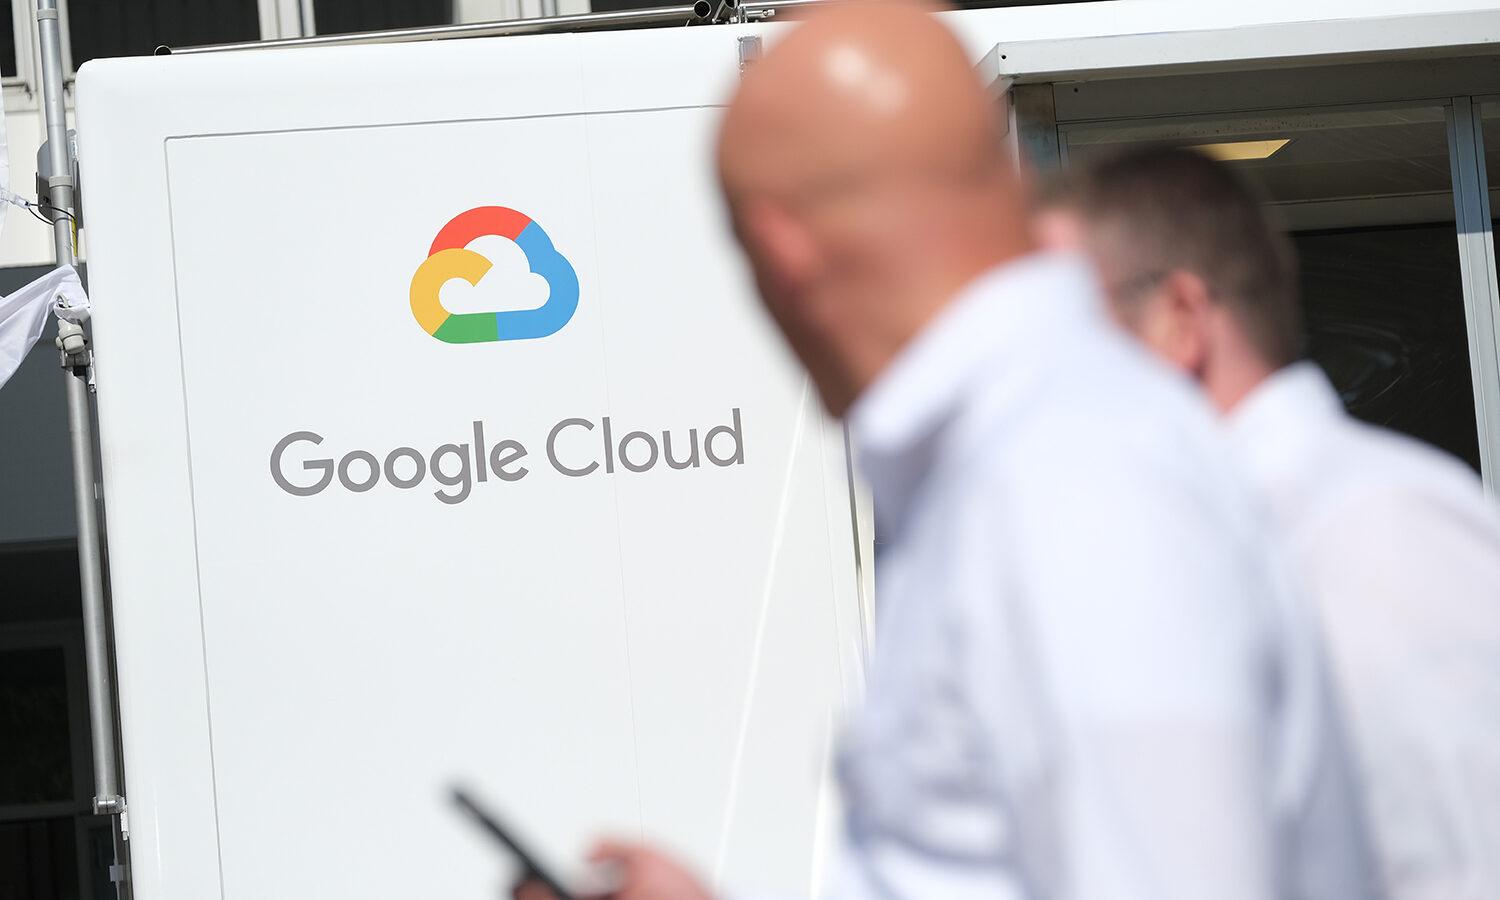 The Google Cloud logo is displayed as people walk by in the foreground.